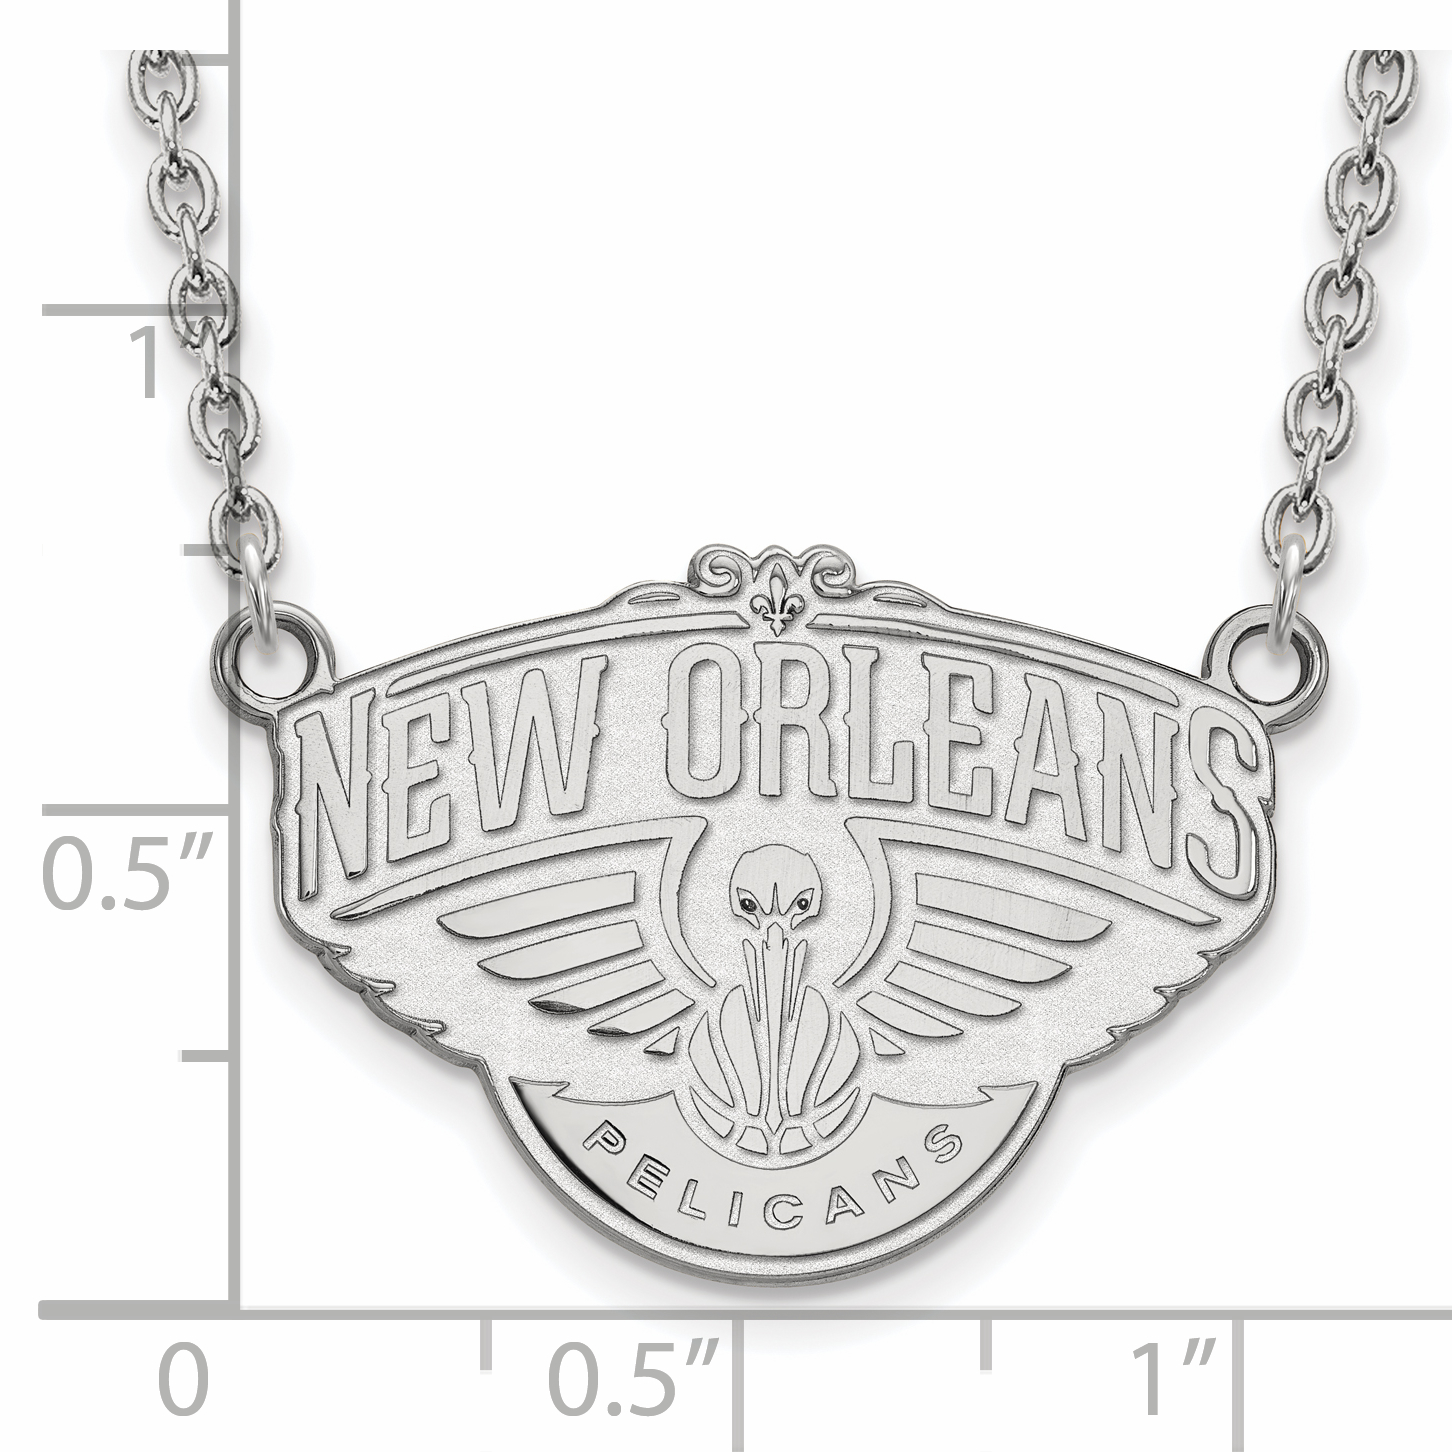 LogoArt 10 Karat White Gold NBA New Orleans Pelicans Pendant with Necklace - image 2 of 5